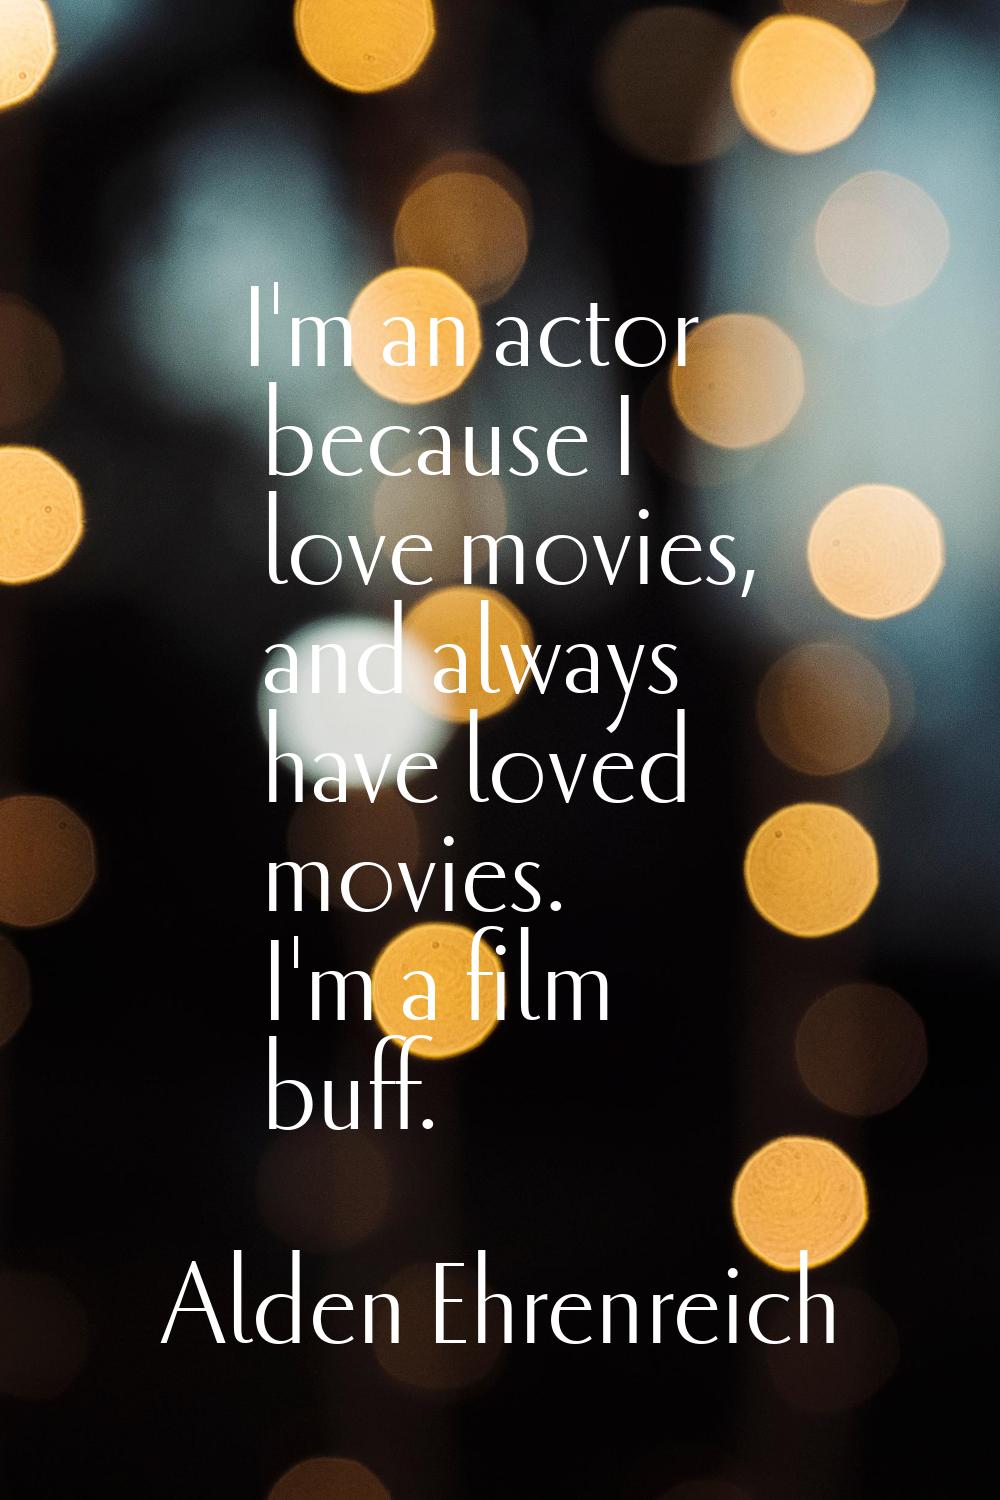 I'm an actor because I love movies, and always have loved movies. I'm a film buff.